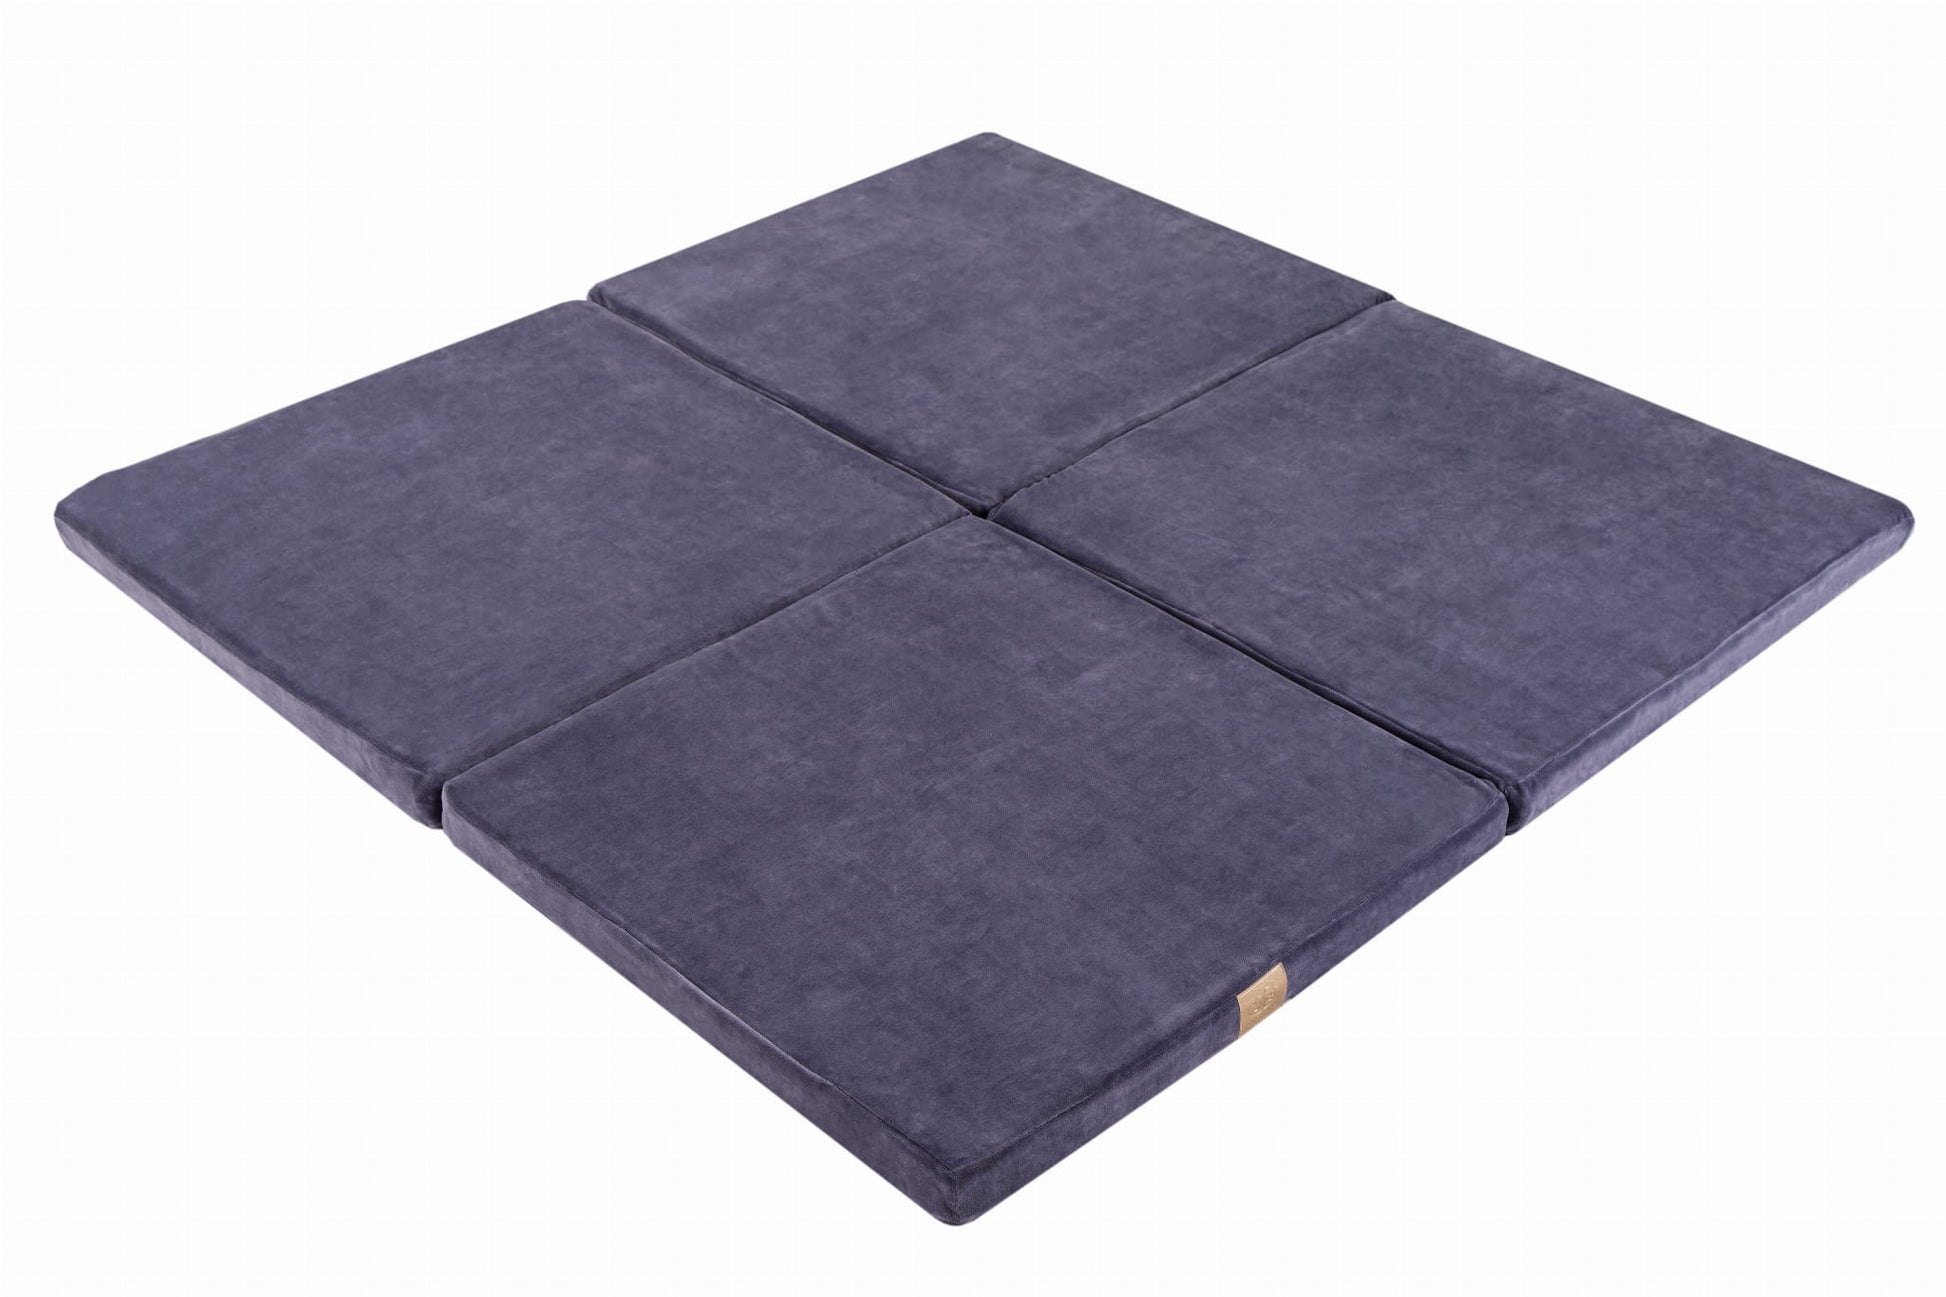 Square Foldable Play Mat For Baby By MeowBaby - Stylemykid.com